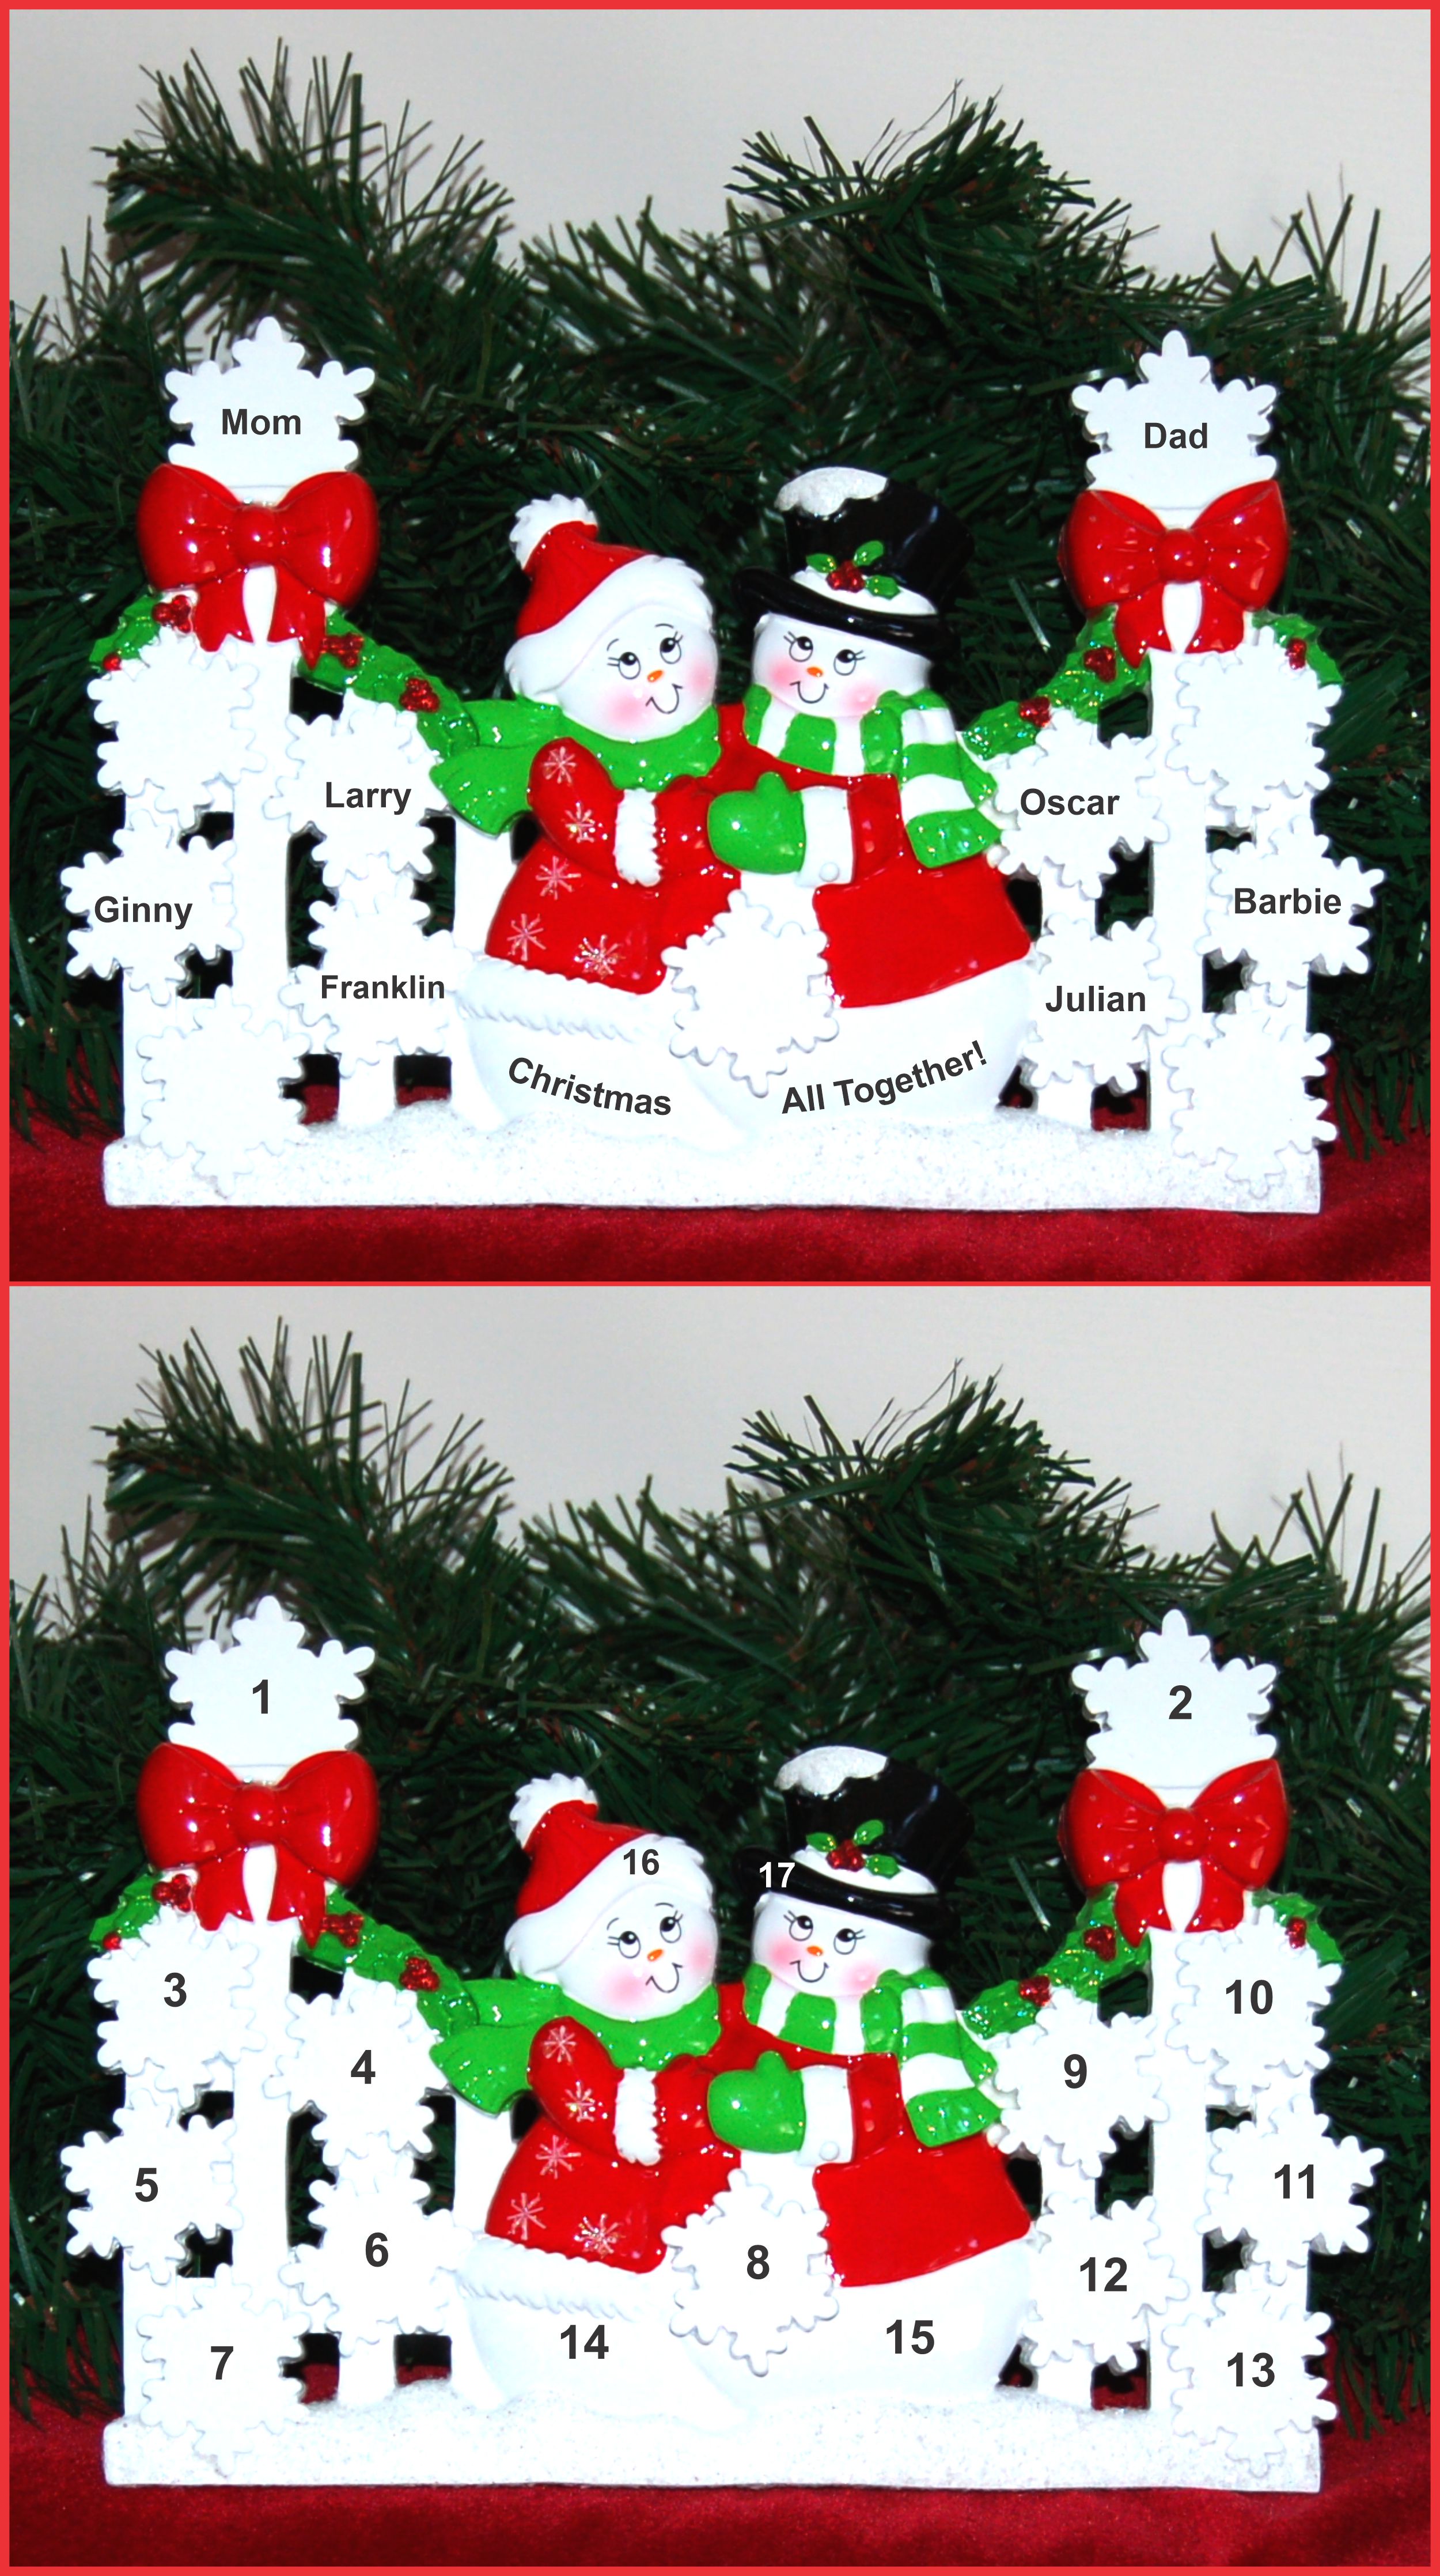 Family Tabletop Christmas Decoration Snowflakes Family of 8 Personalized by RussellRhodes.com